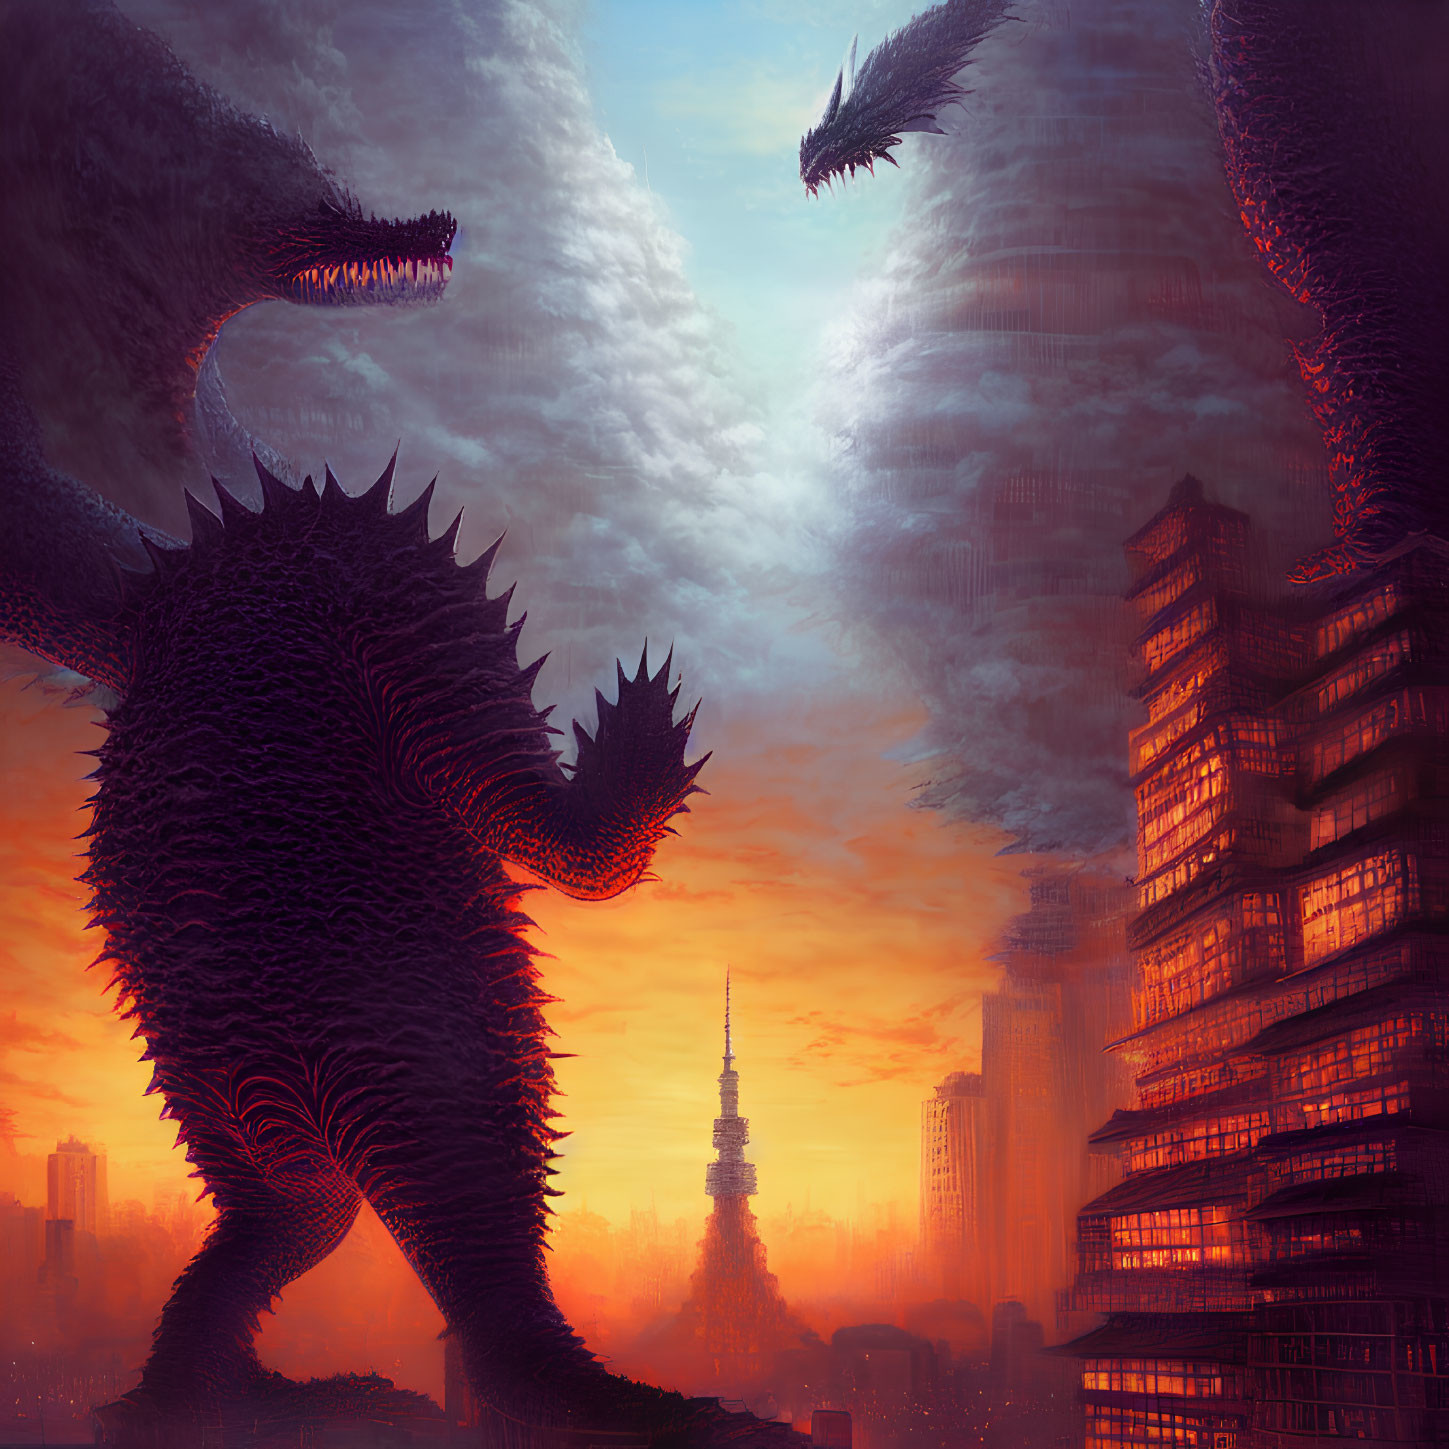 Enormous reptilian monsters dominate city skyline at sunset